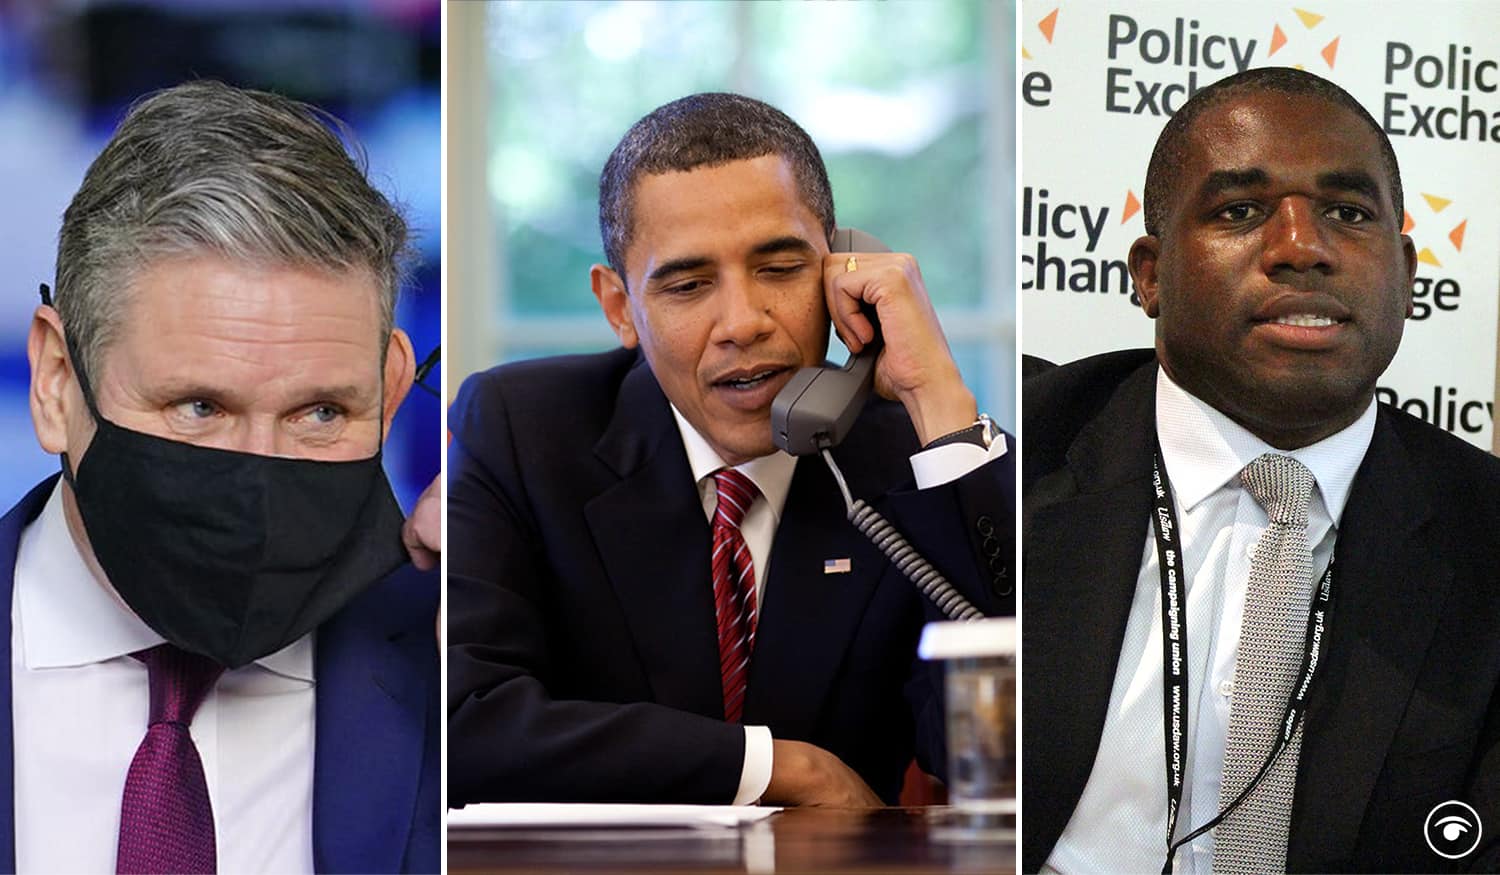 Obama in discussions with Starmer and Lammy amid optimism over Labour’s chances at next election